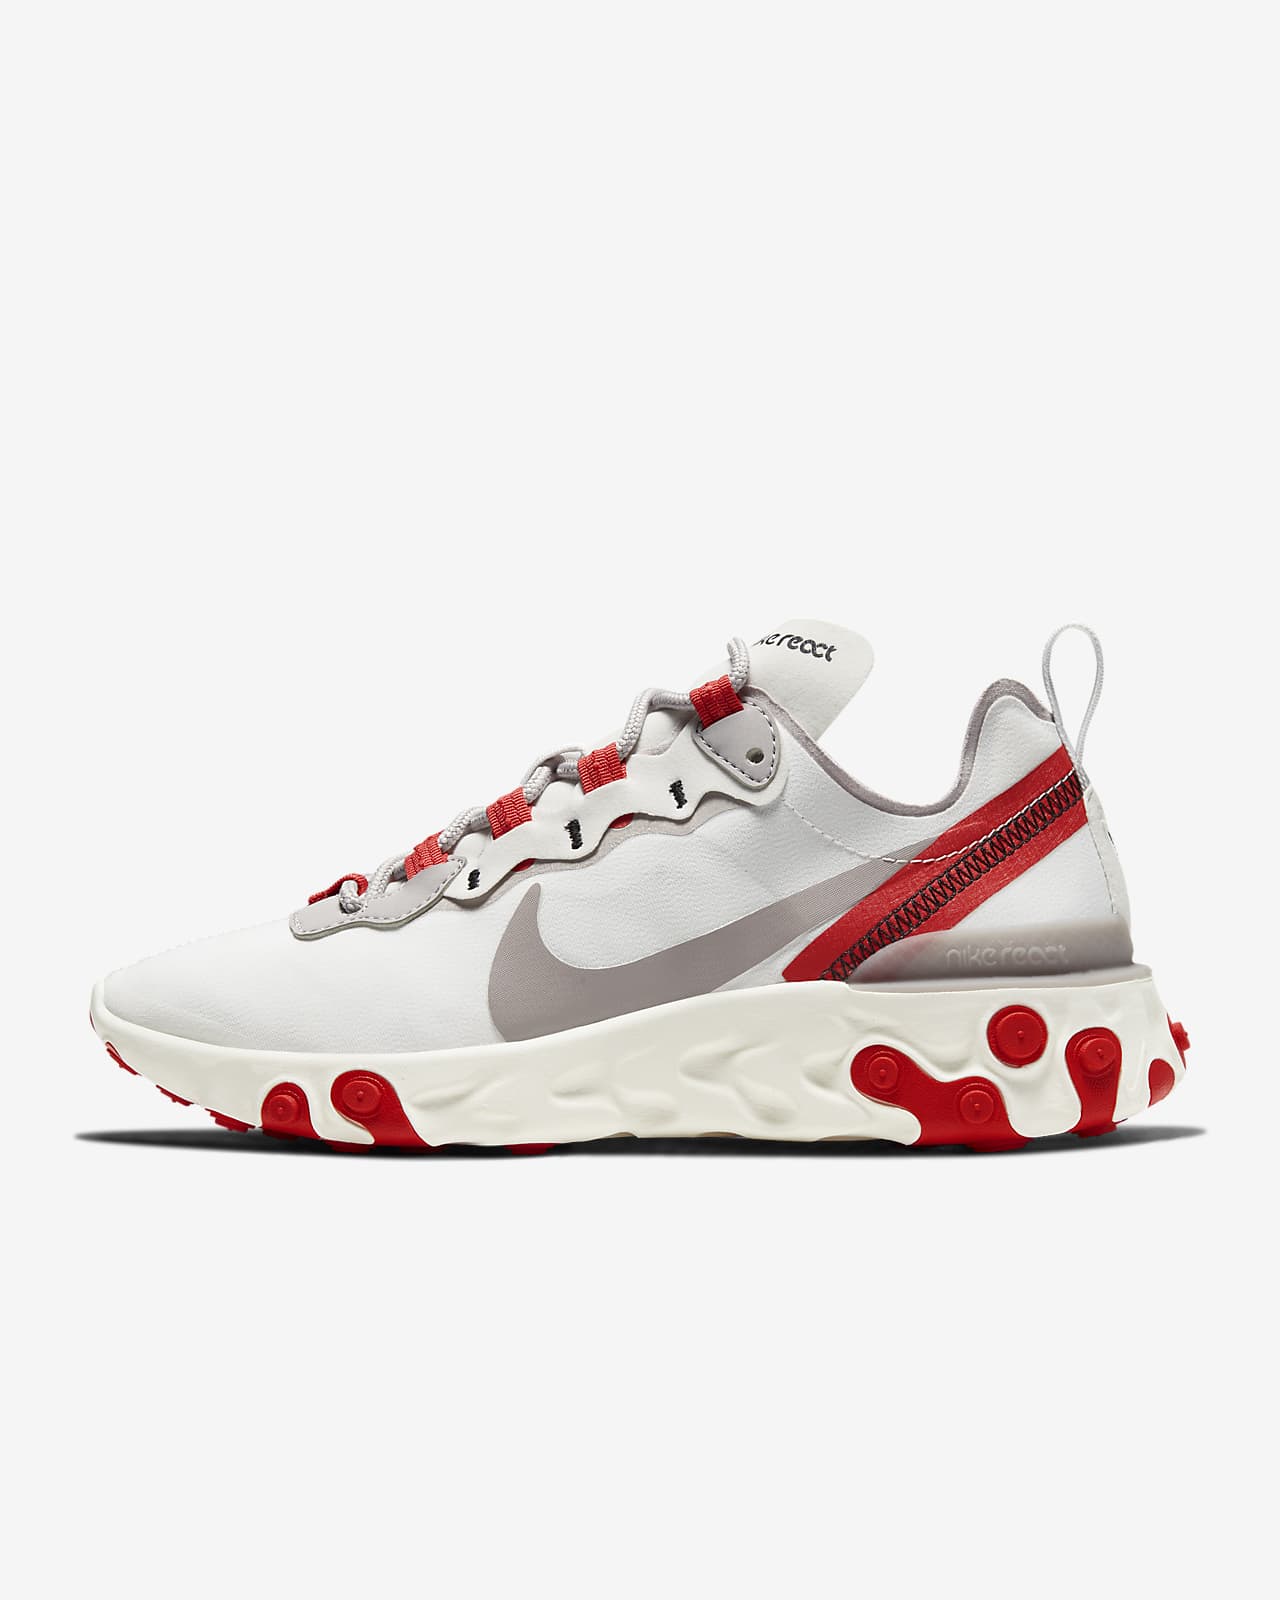 nike react element 55 white and red